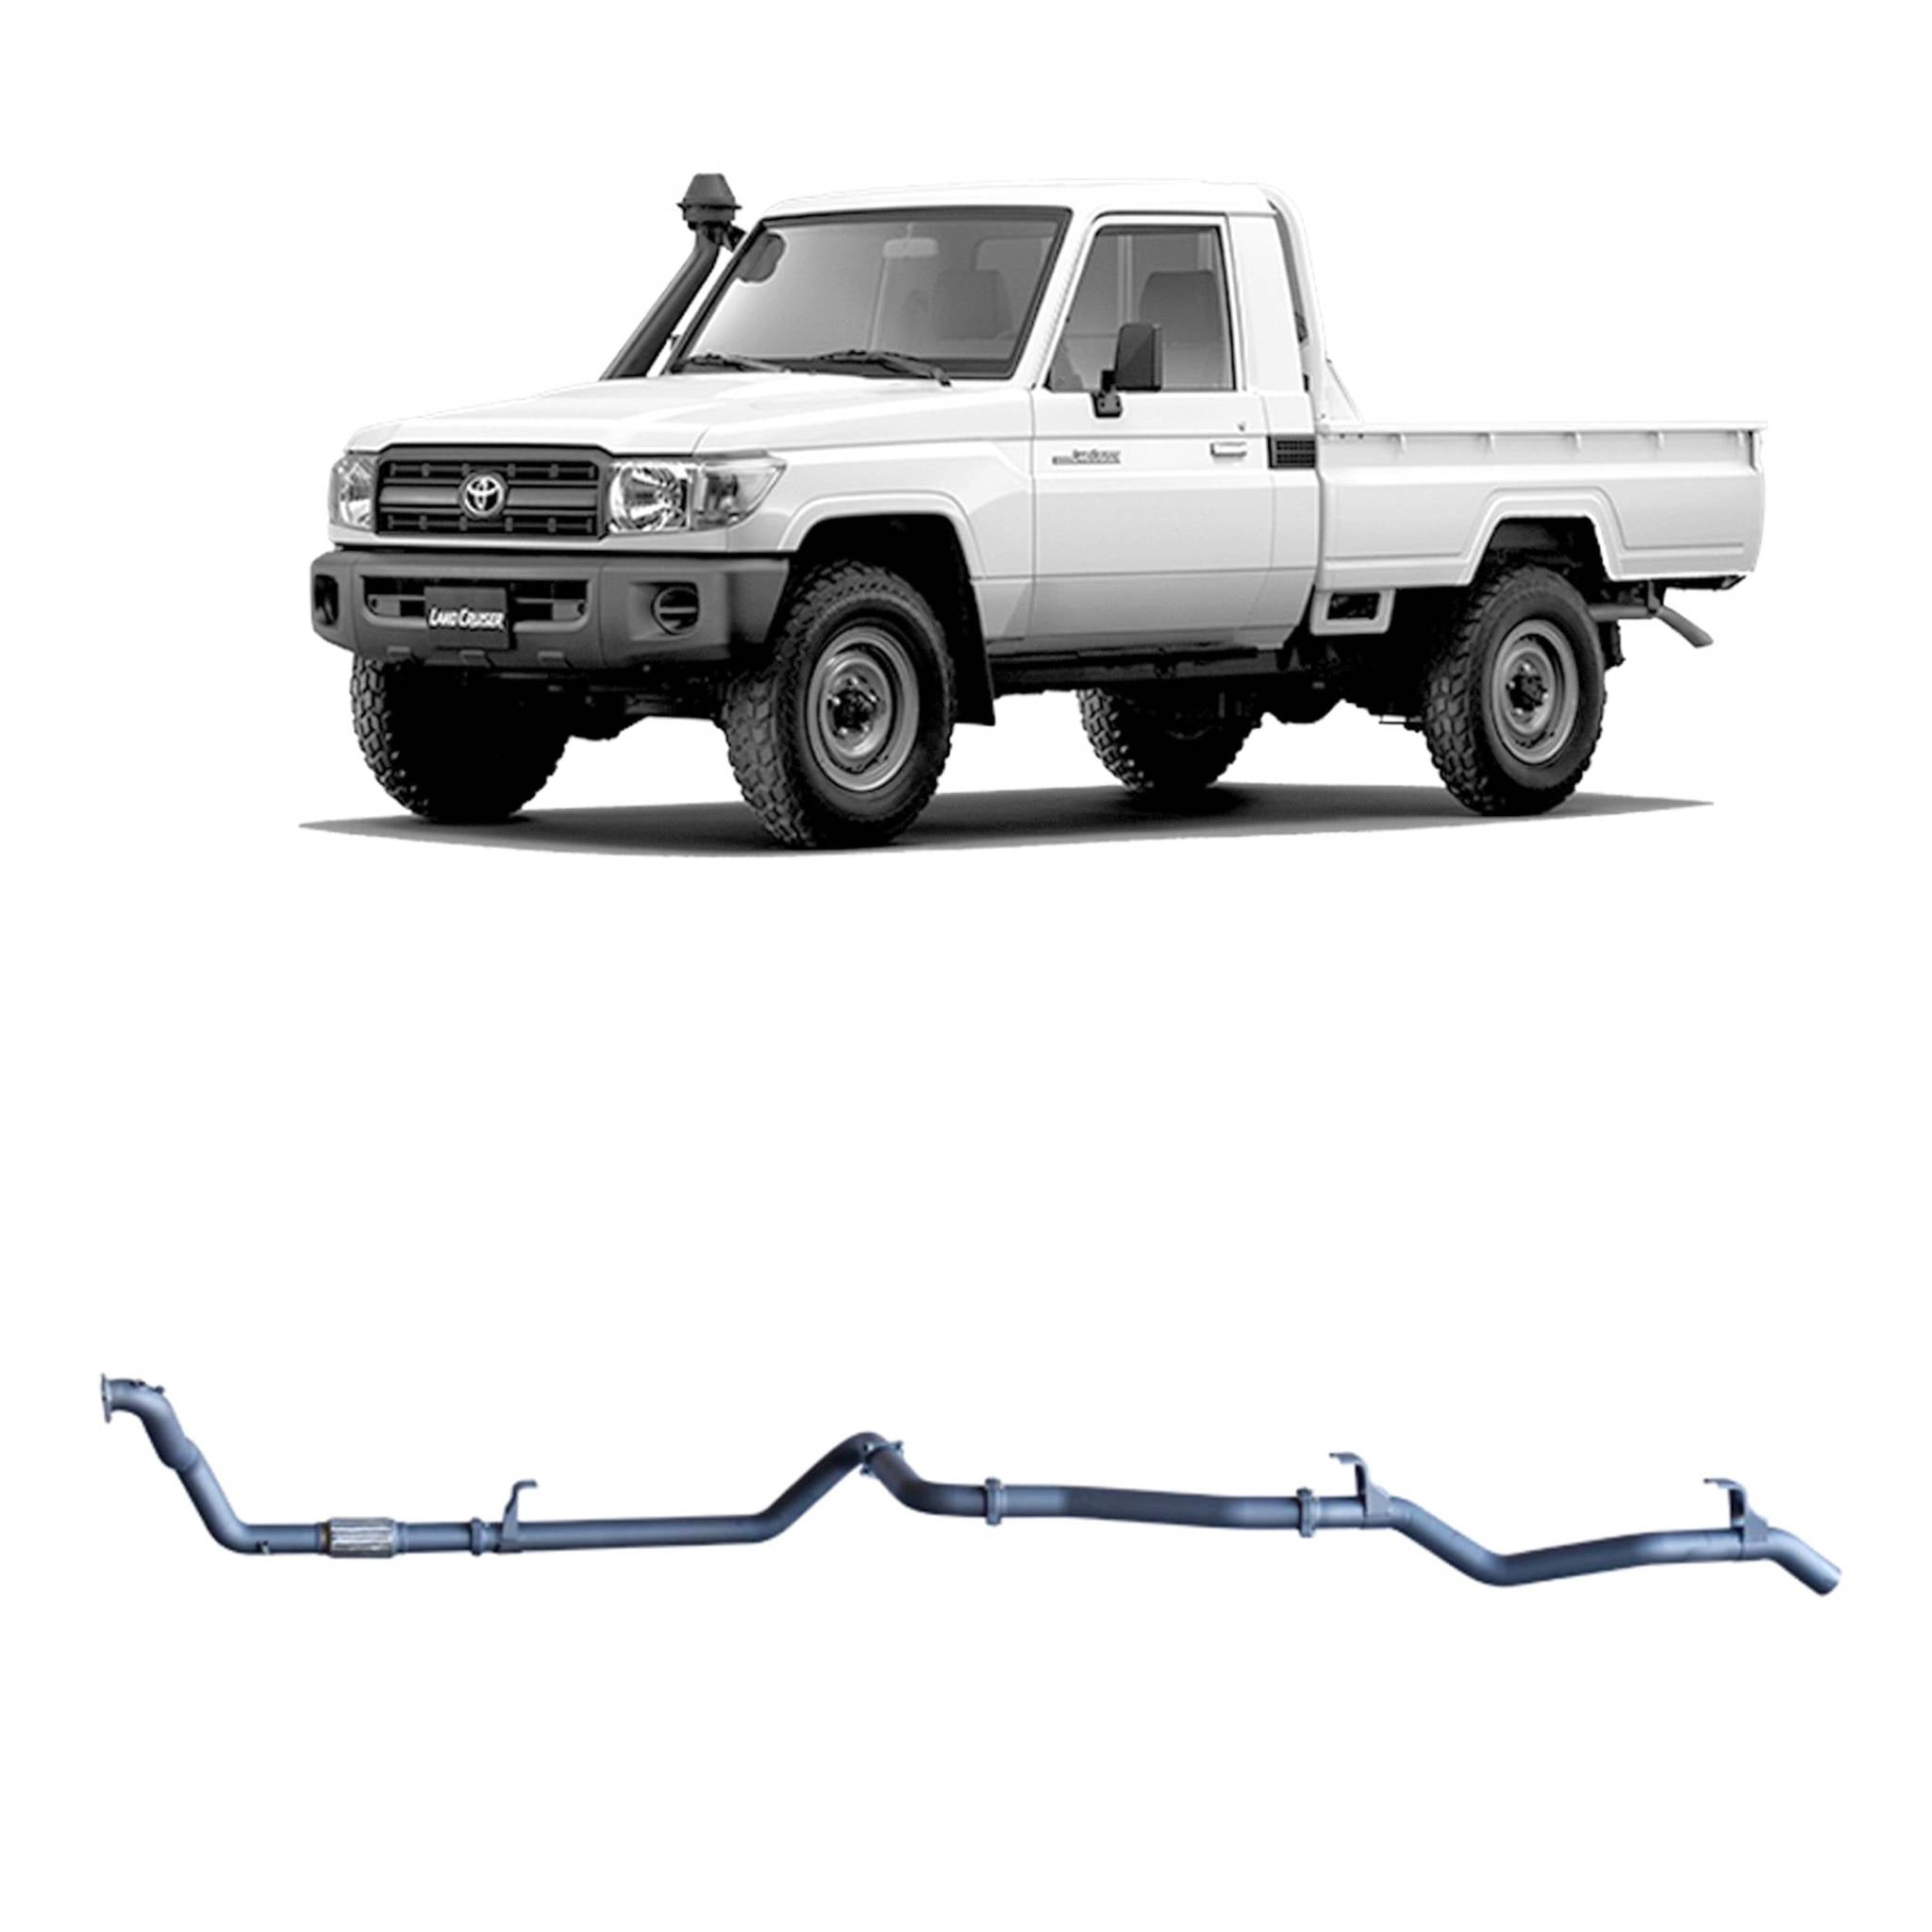 Redback Extreme Duty Exhaust to suit Toyota Landcruiser 79 Series 4.2L 1HZ (10/1999 - 01/2007)